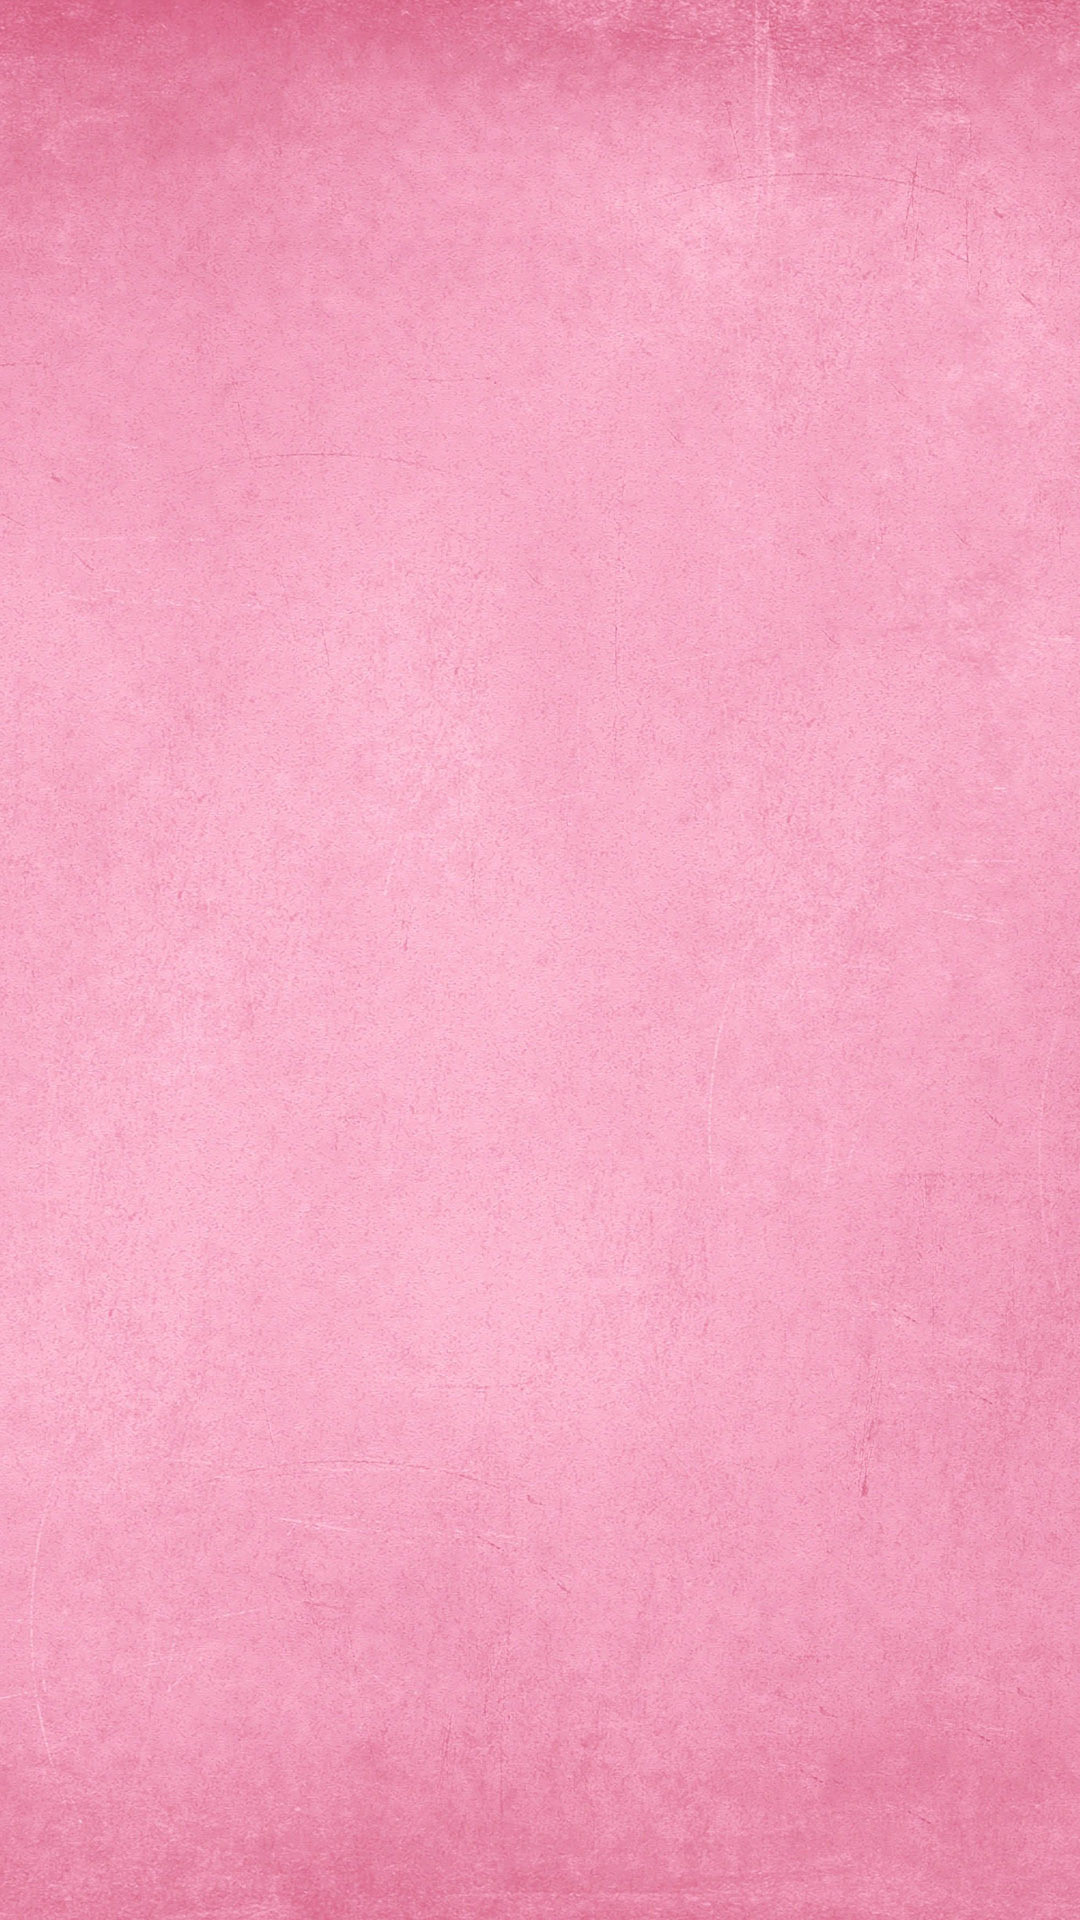 1080x1920 Texture Mobile Wallpapers Pink Abstract Wallpaper. small apartment plans.  christmas front door. minimalistic ...